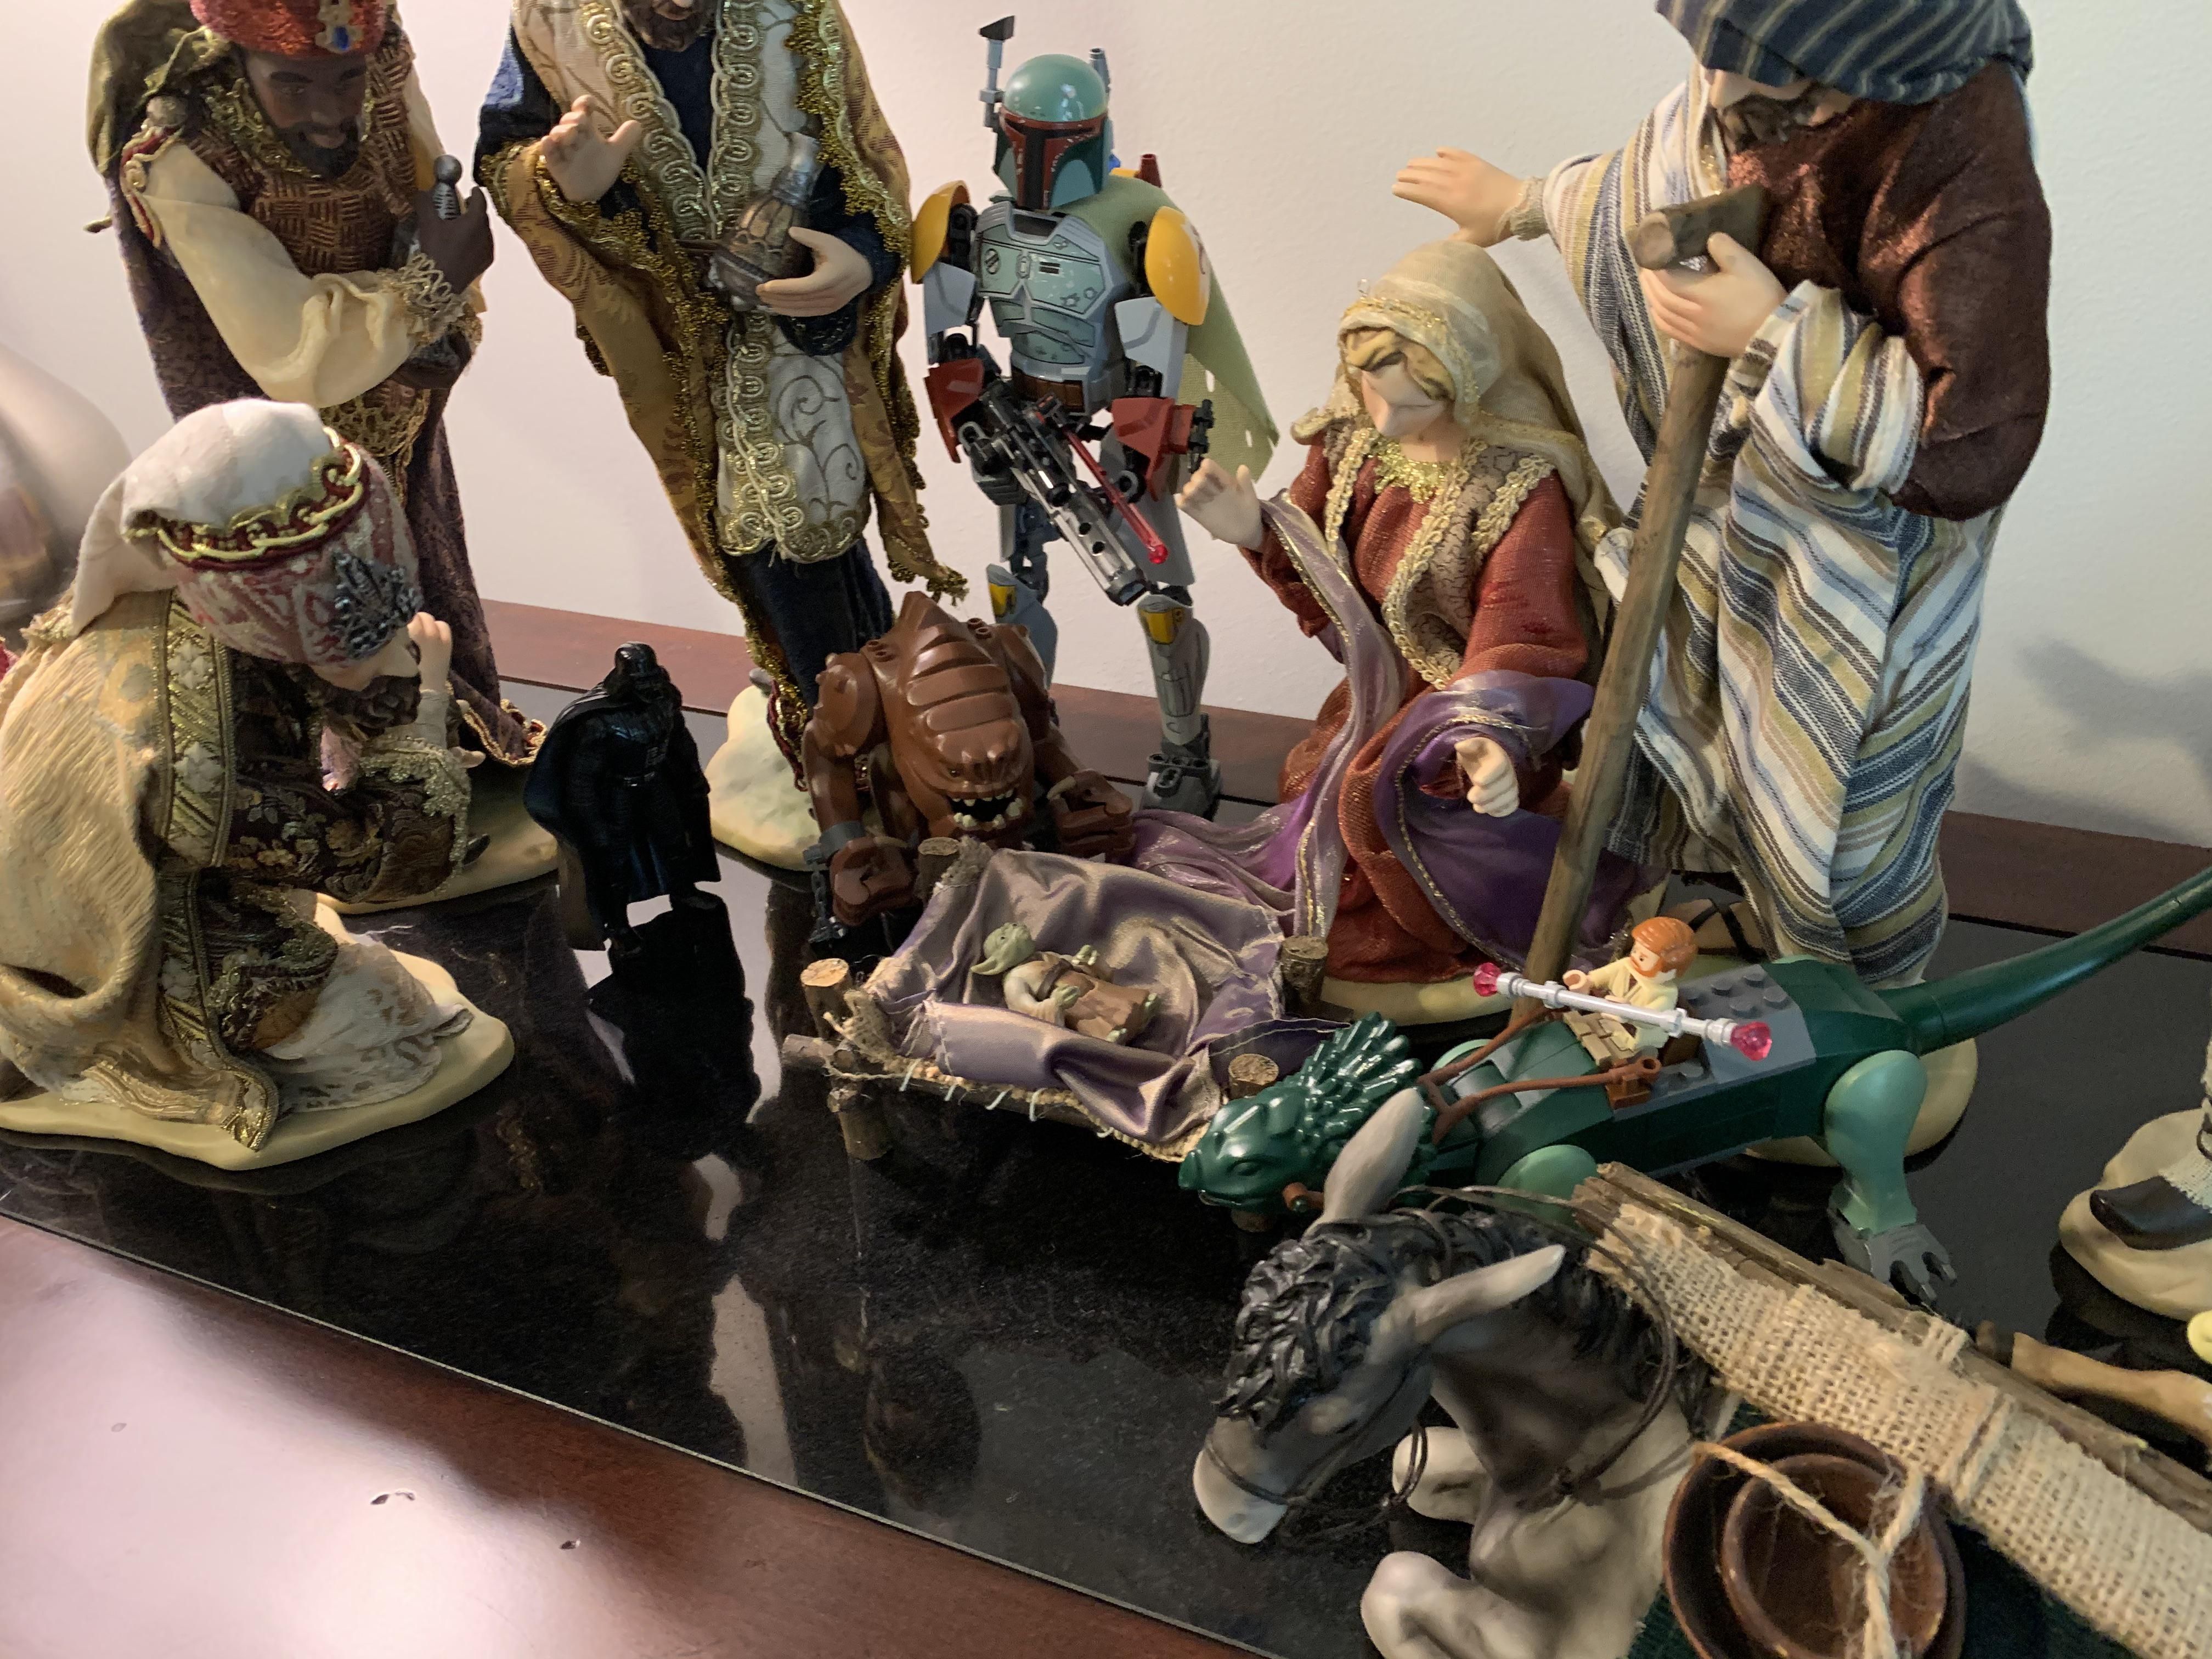 Day 3 of adding stuff to the nativity scene until my mom notices.